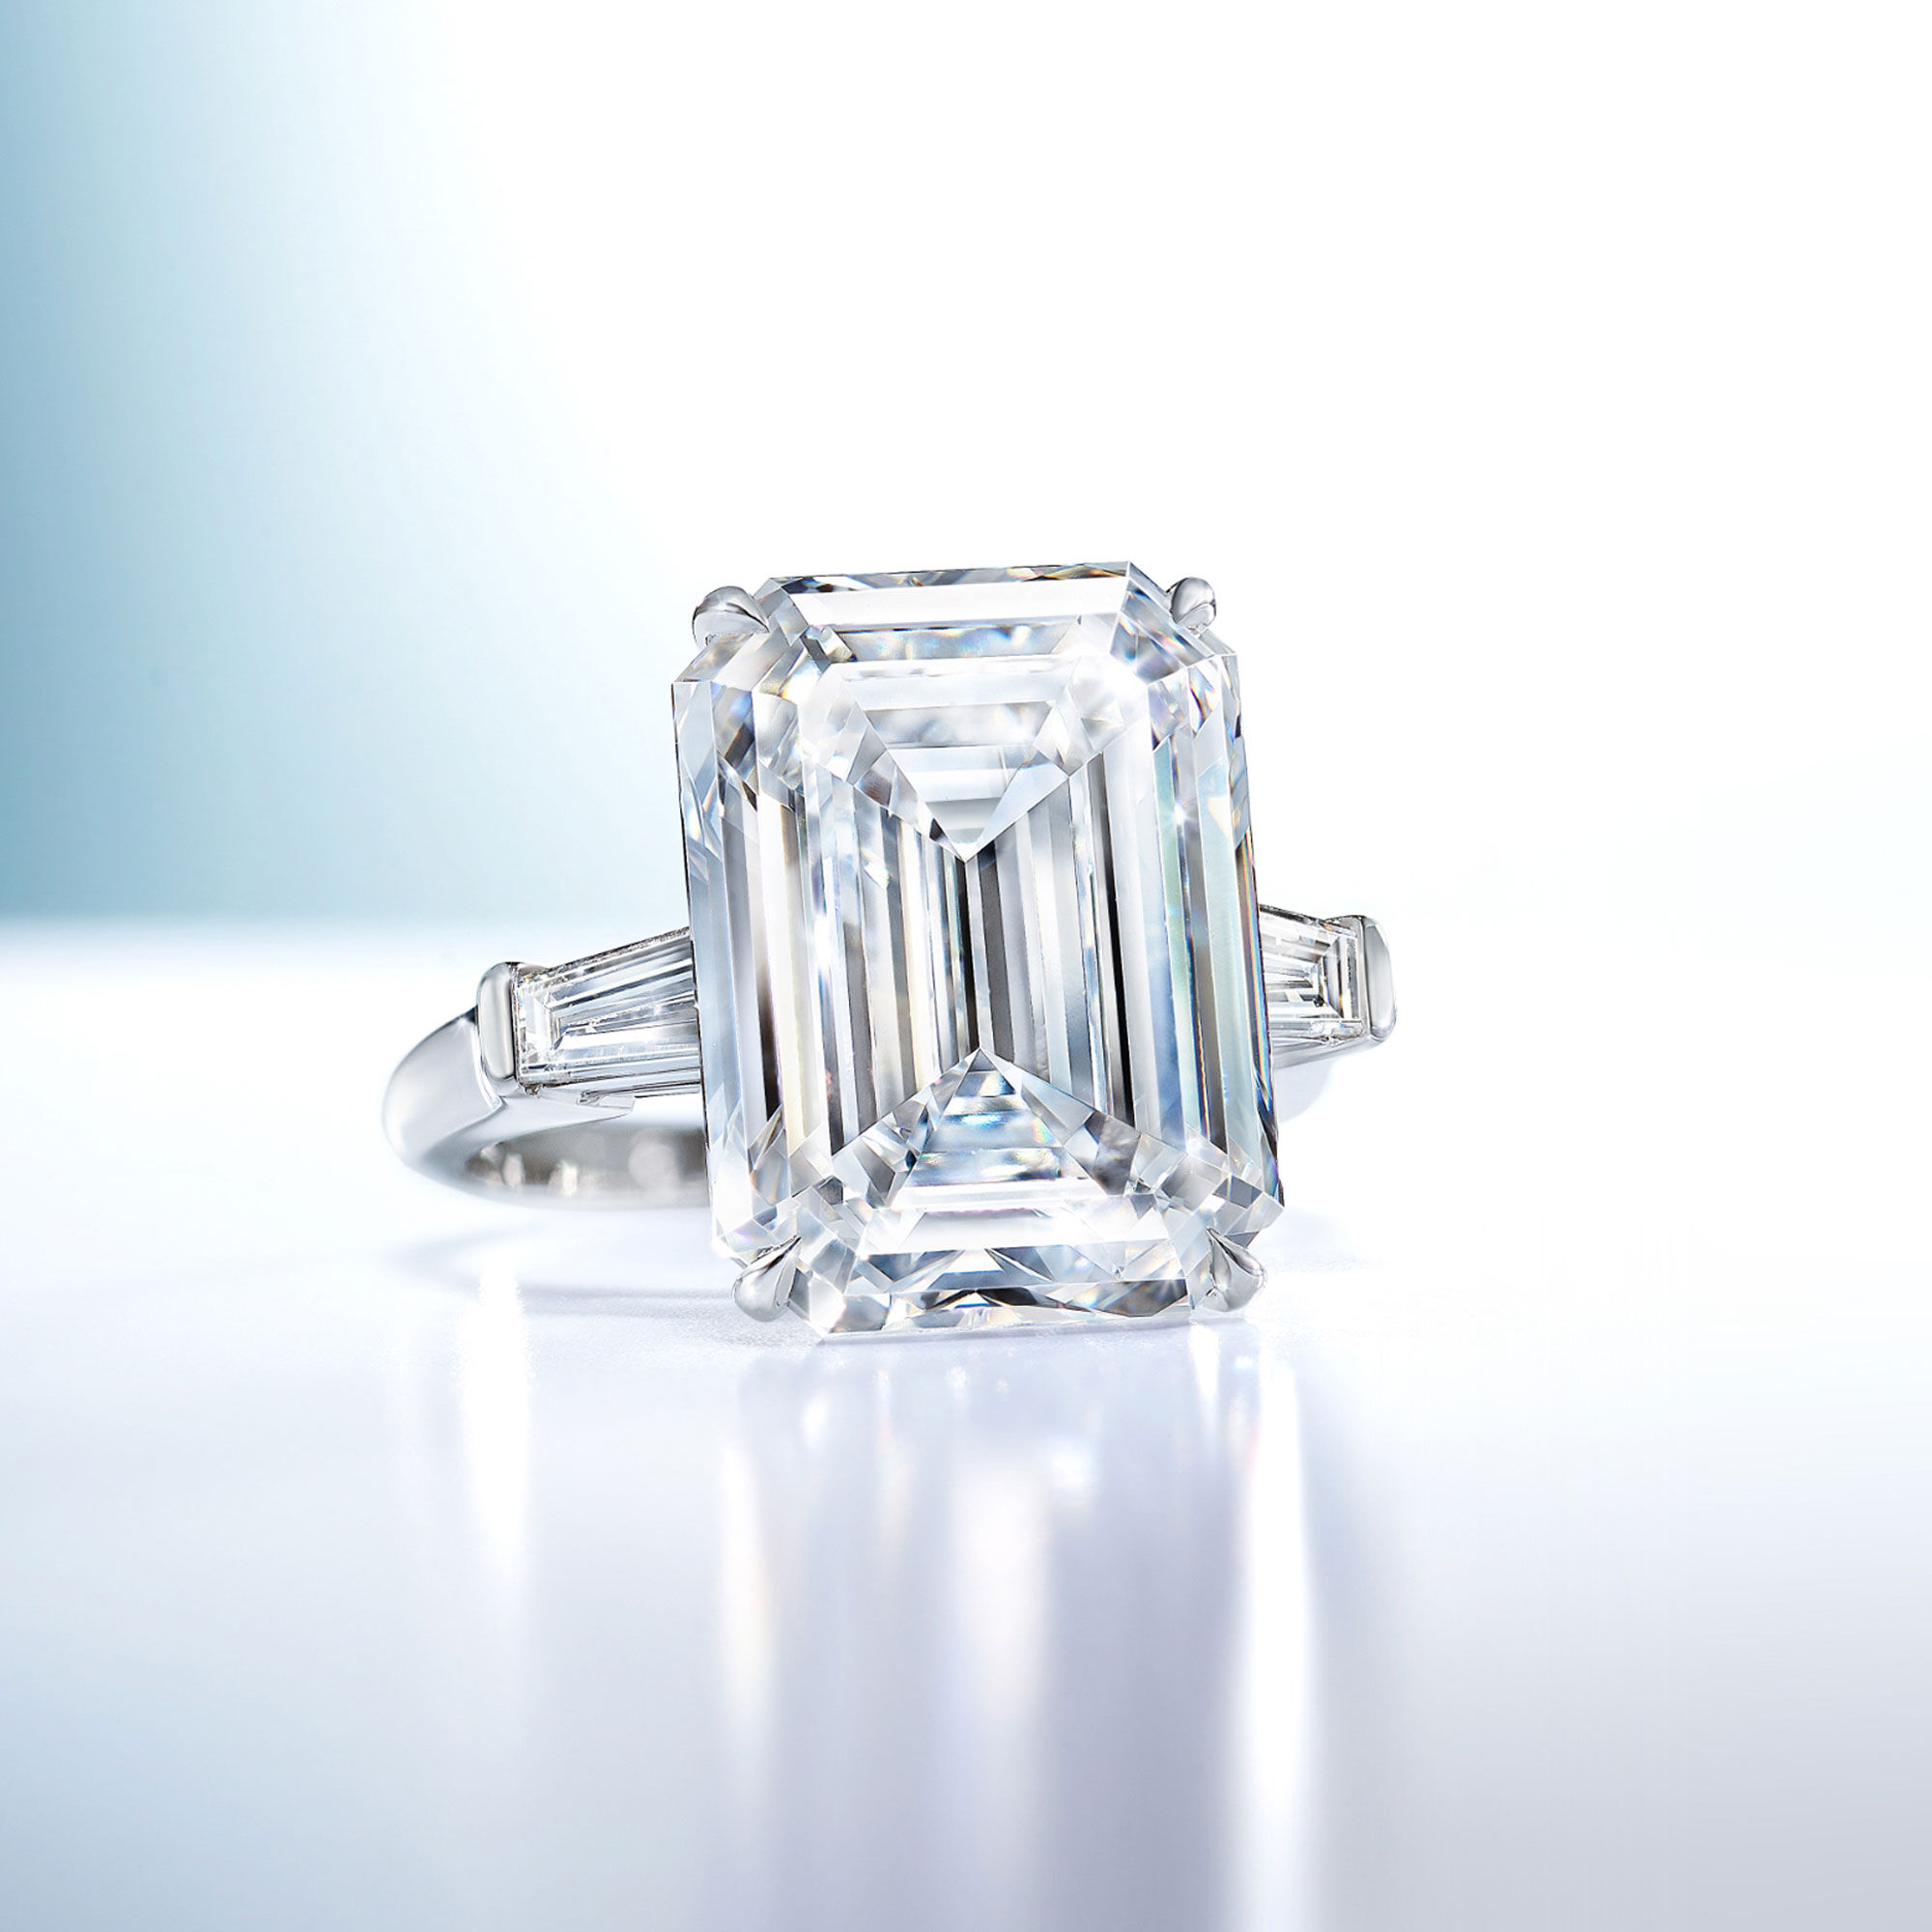 An emerald cut white diamond ring with baguette cut side stones